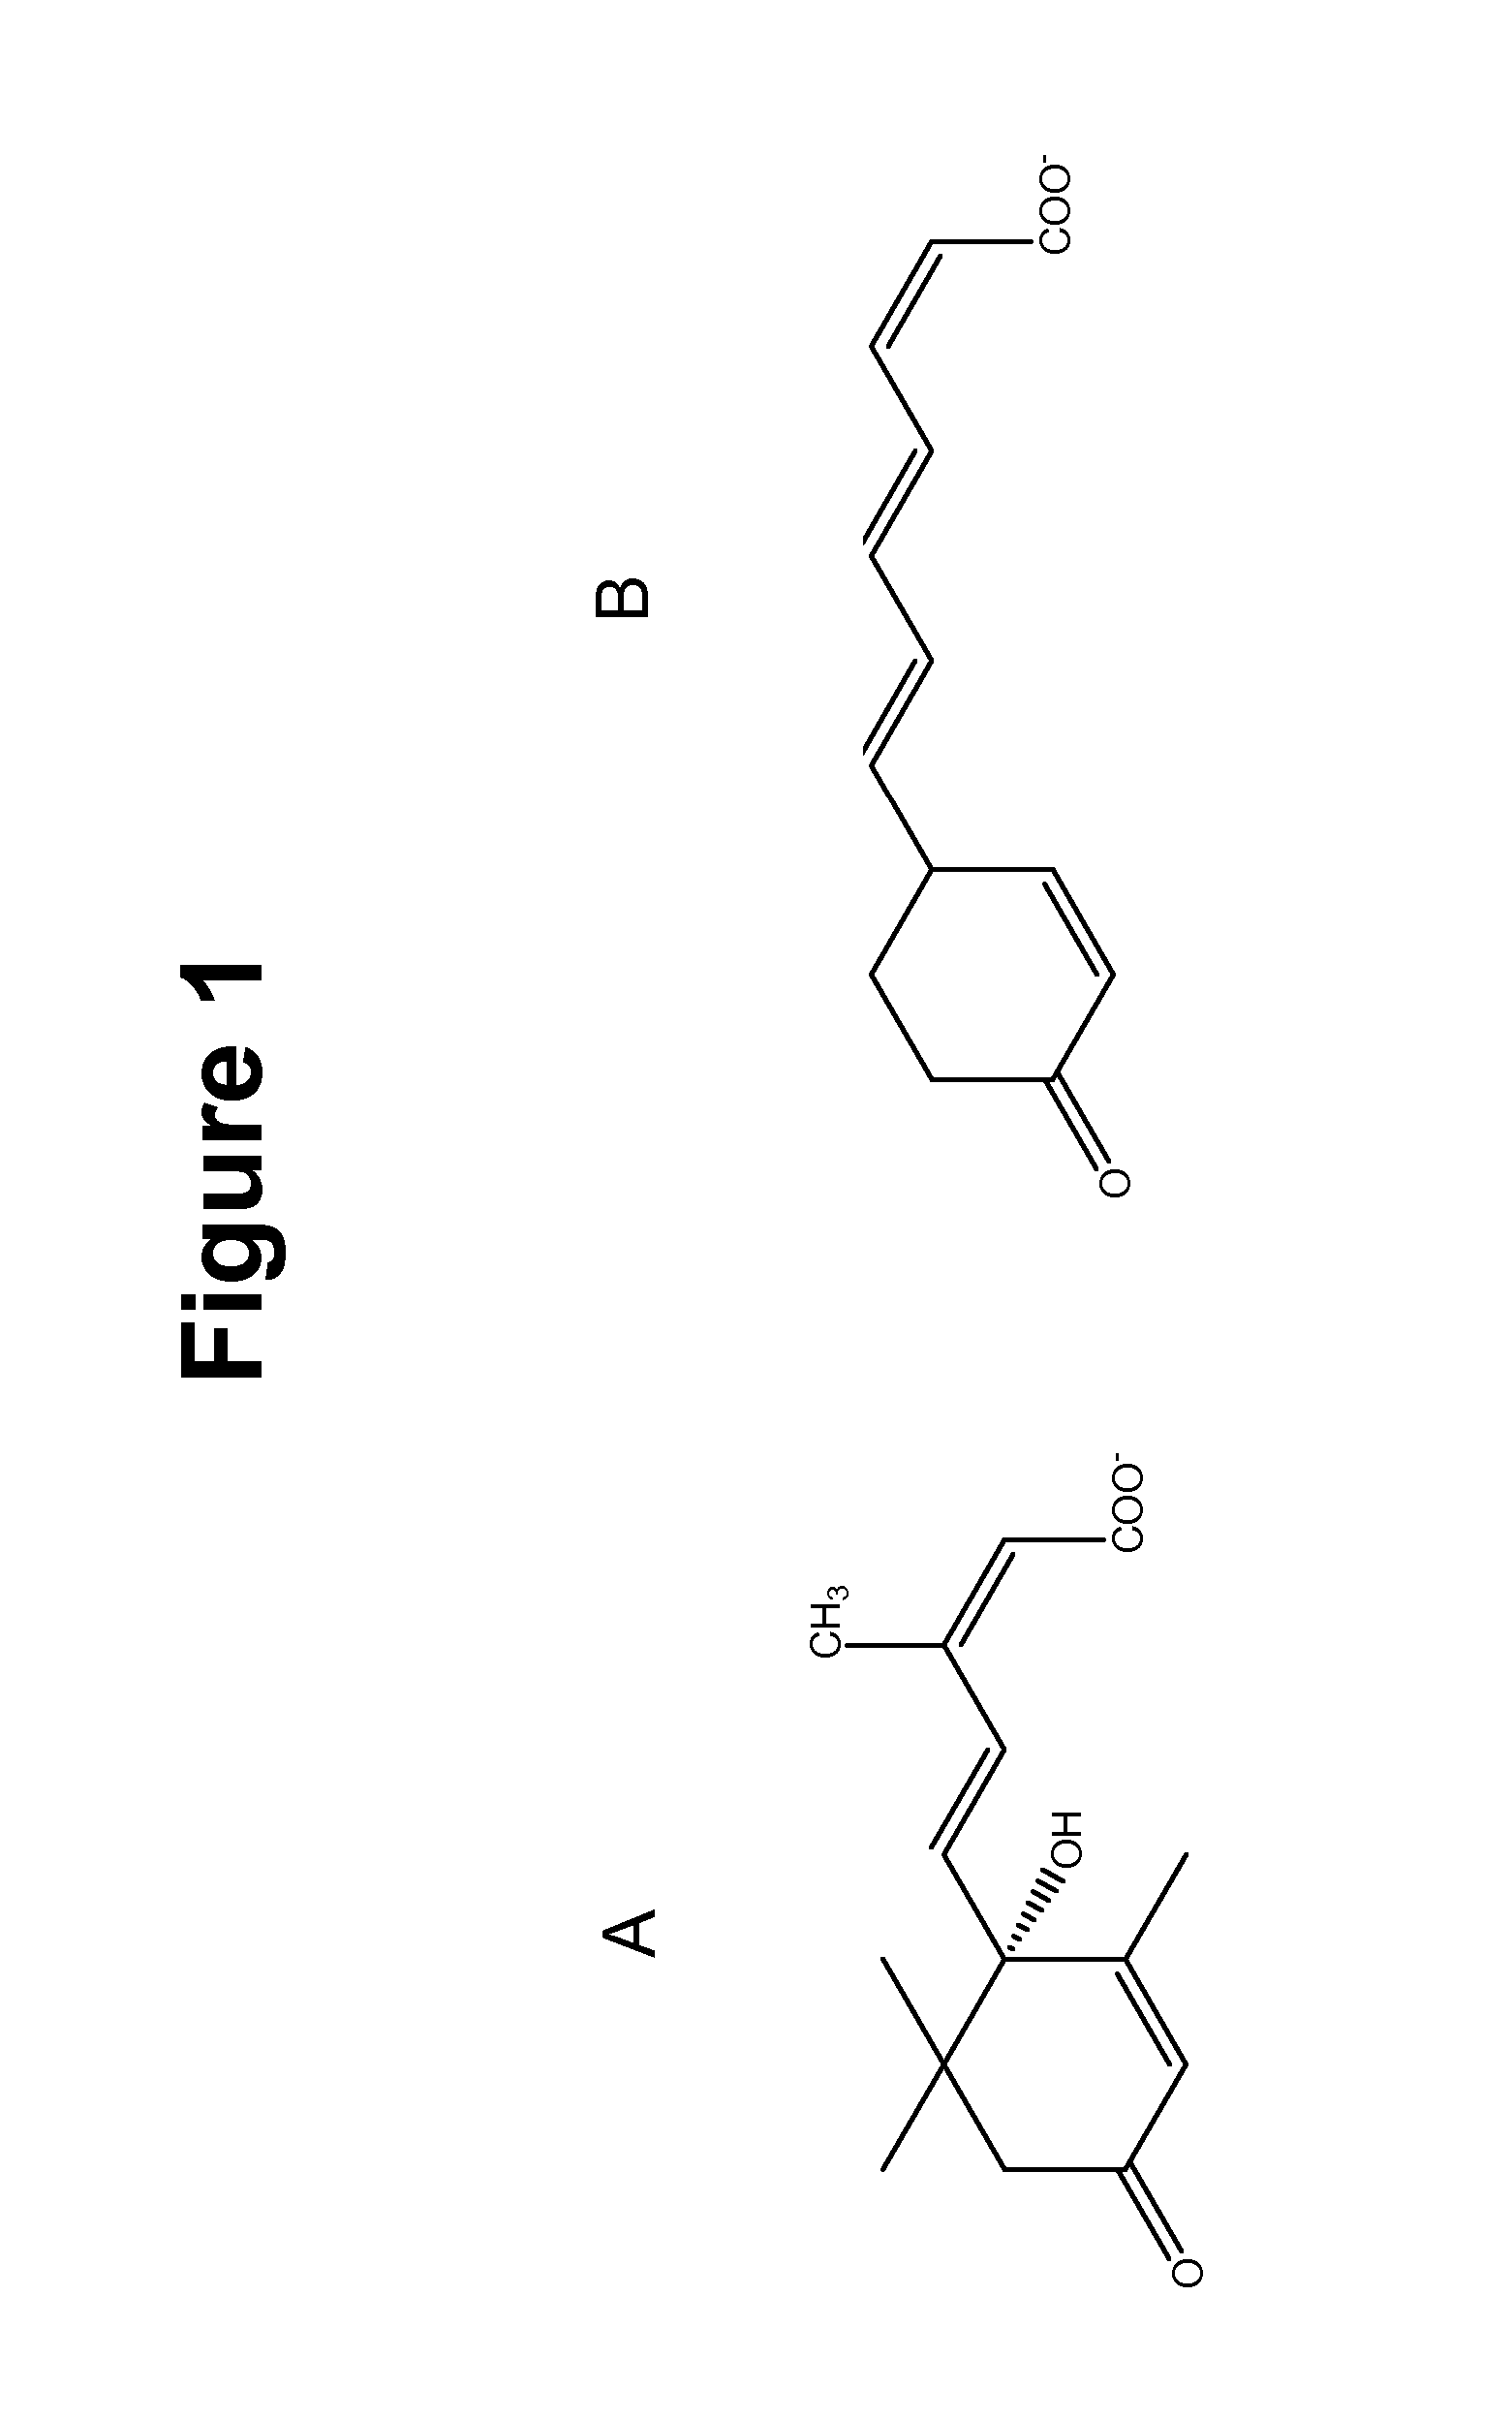 Method of using abscisic acid to treat diseases and disorders